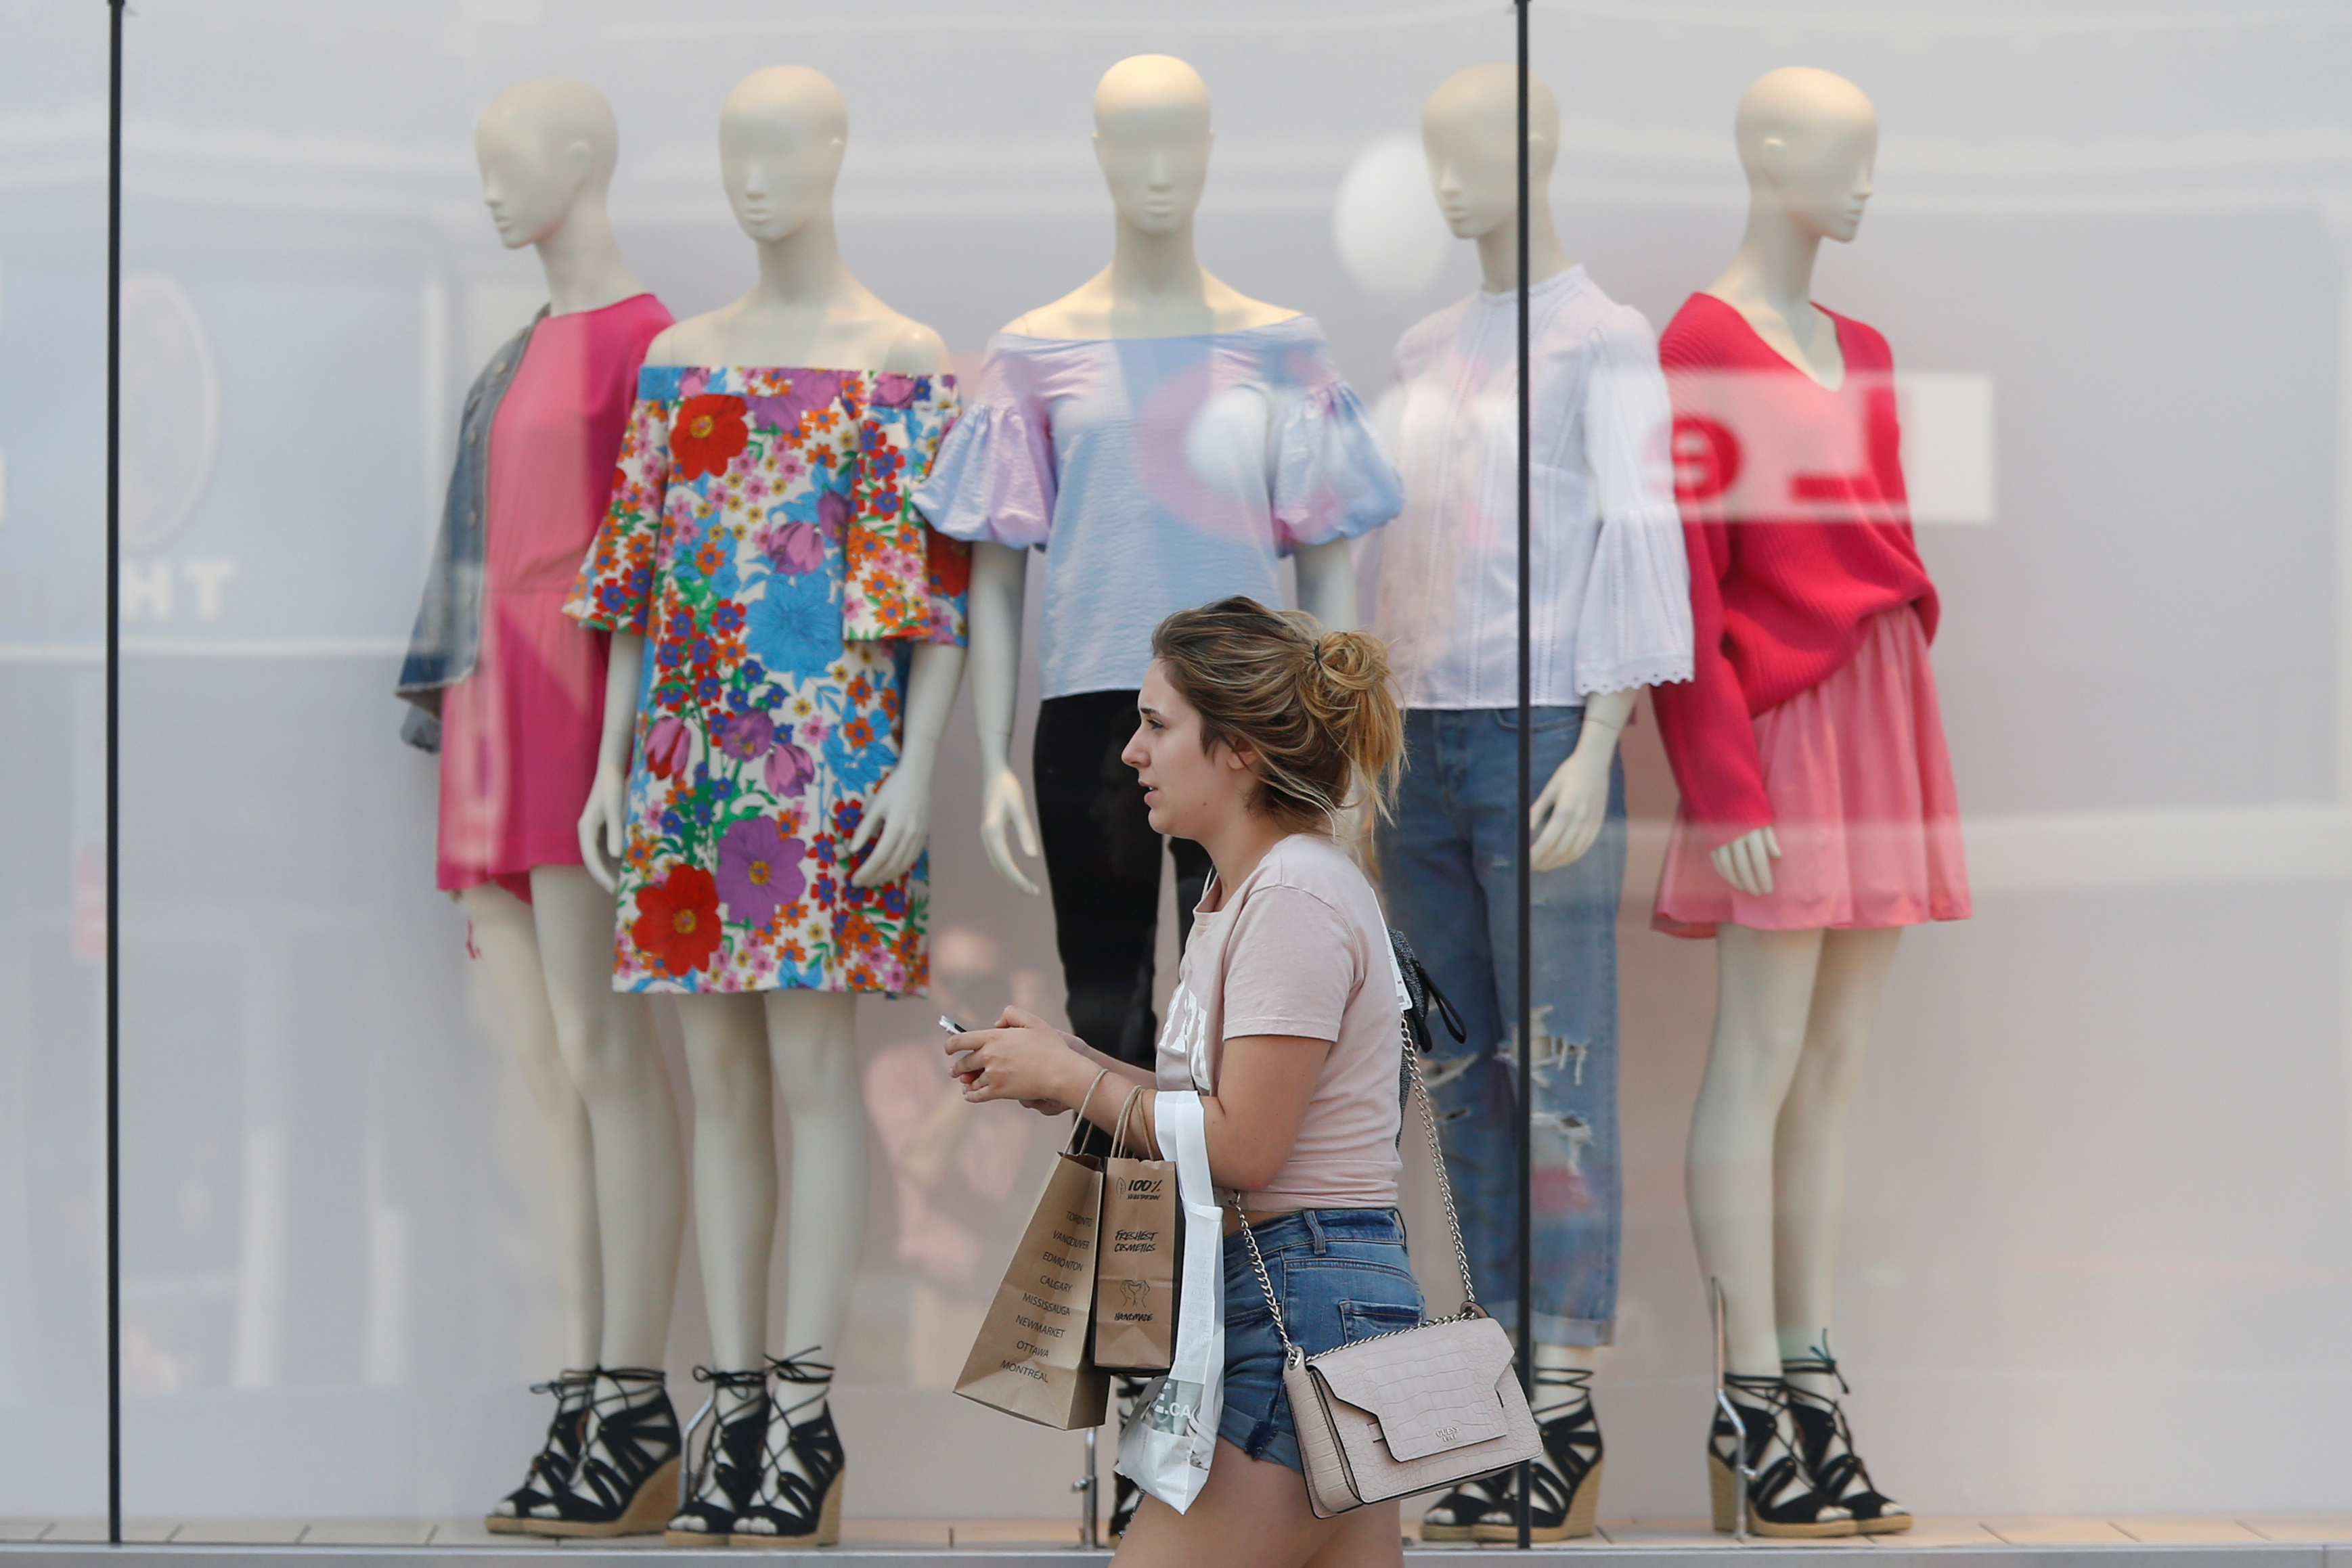 A woman carries shopping bags while walking past a window display outside a retail store in Ottawa